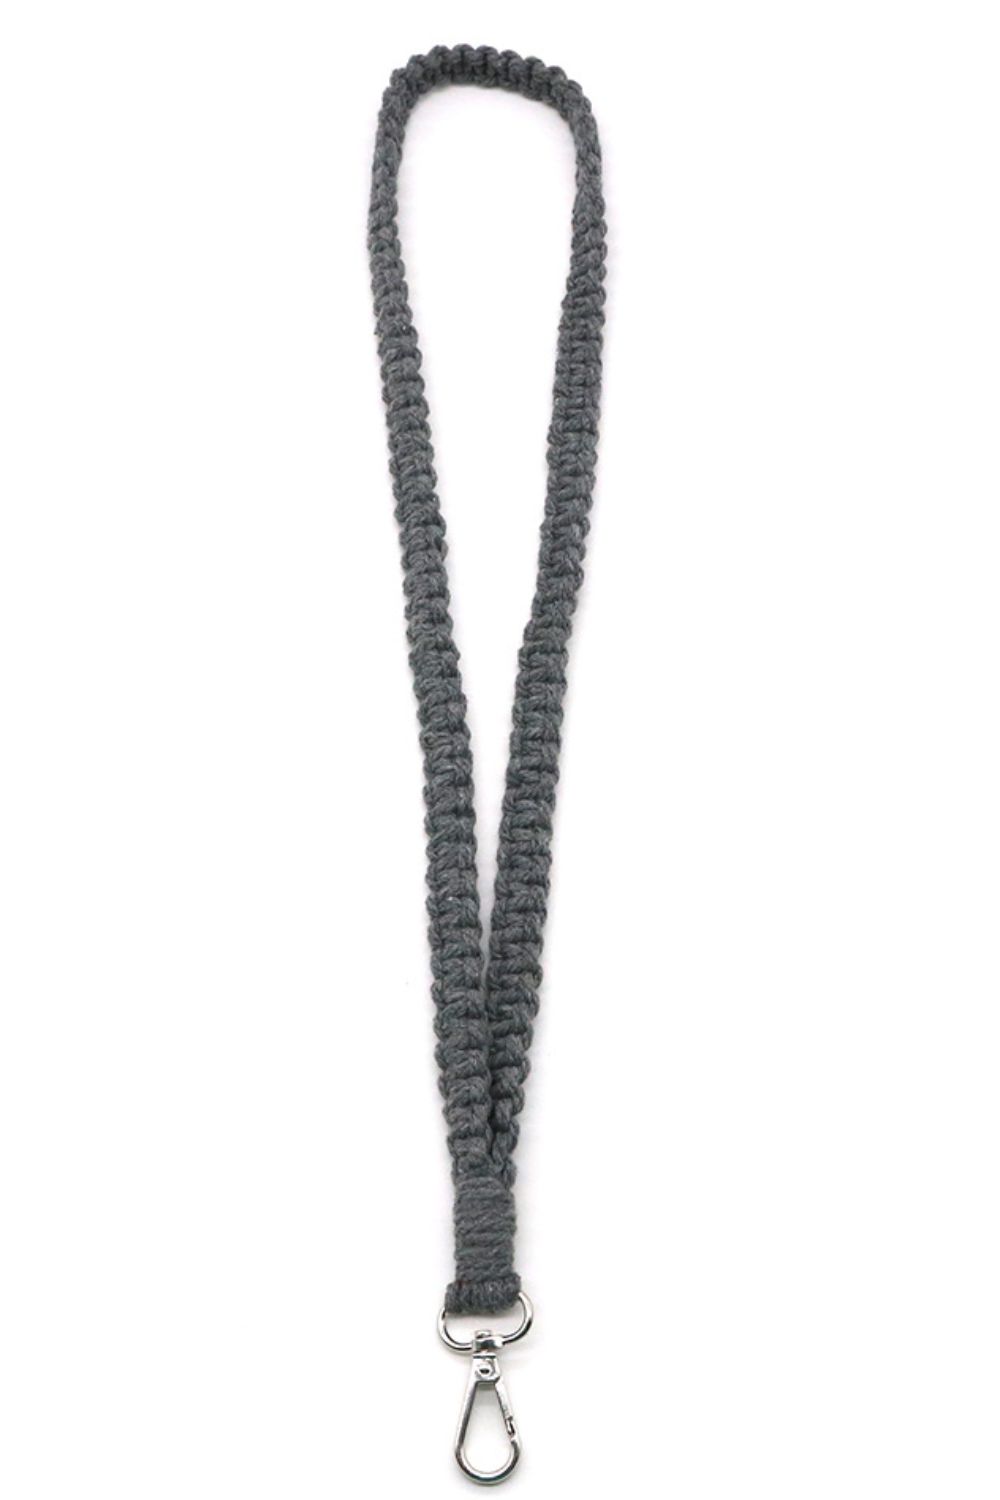 Dim Gray Assorted 2-Pack Hand-Woven Lanyard Keychain Sentient Beauty Fashions Apparel &amp; Accessories